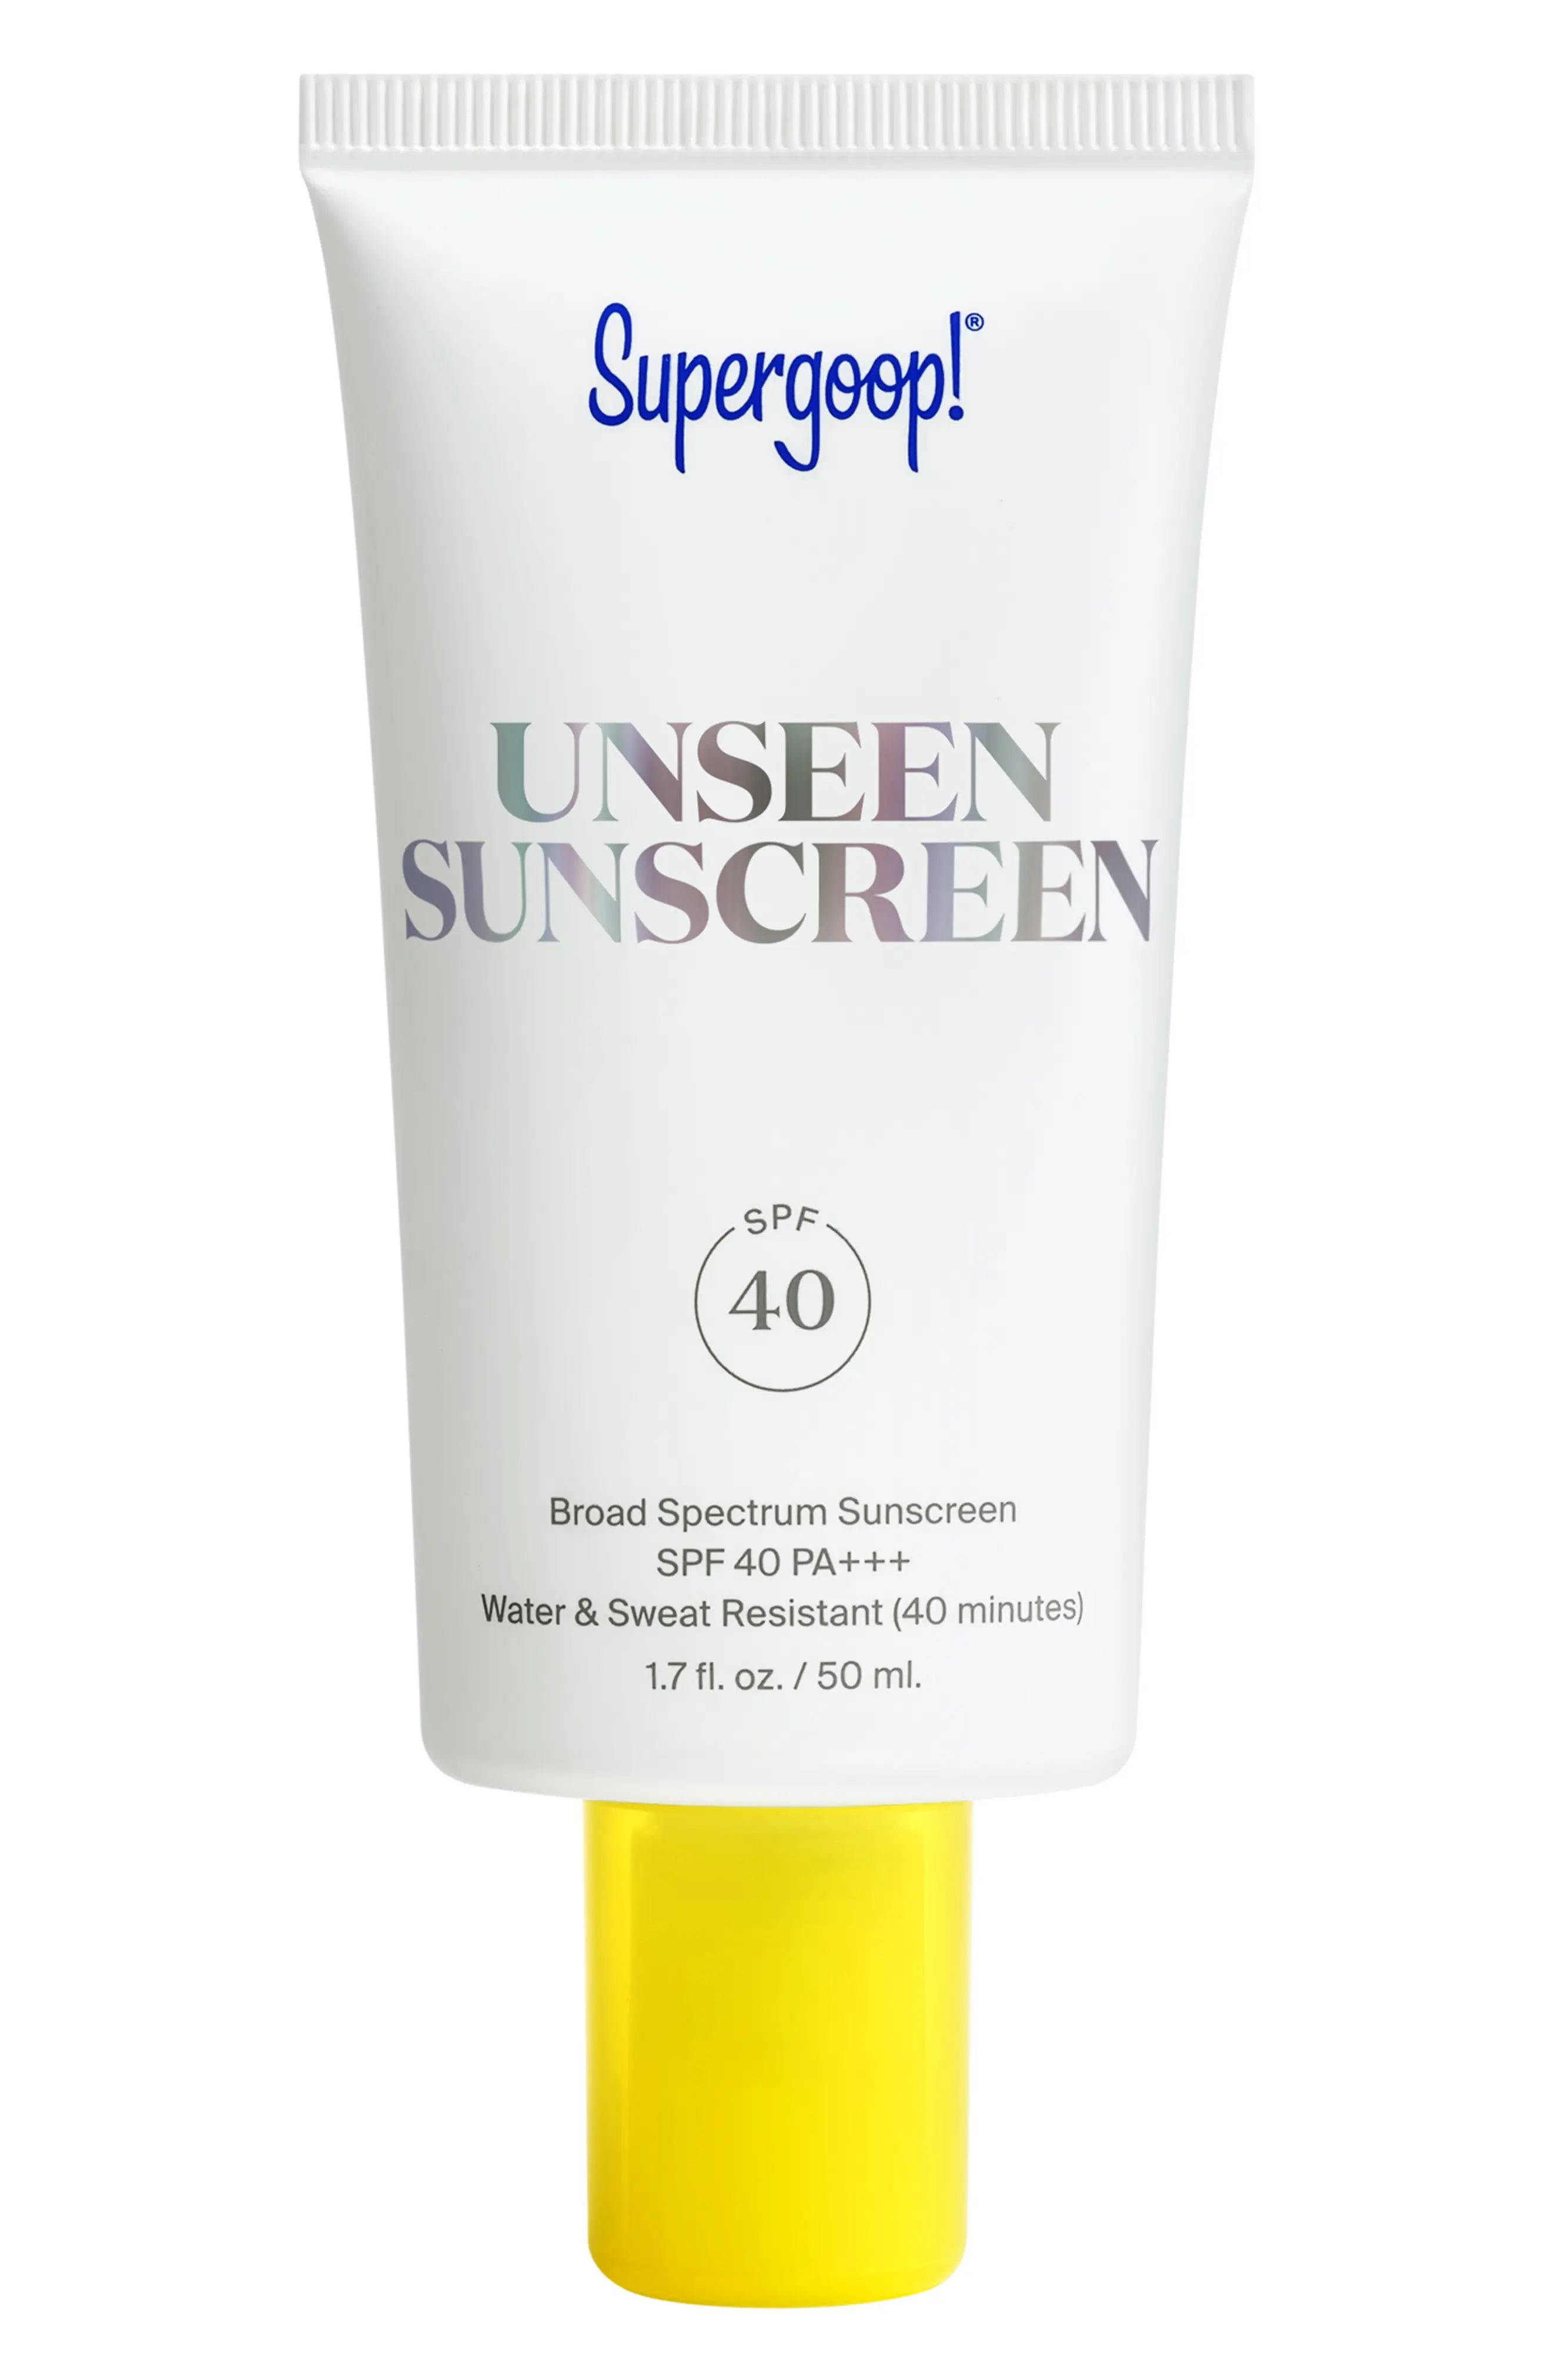 Supergoop! Unseen Sunscreen Broad Spectrum Spf 40 Pa+++, Size 0.5 oz - No Color | Nordstrom